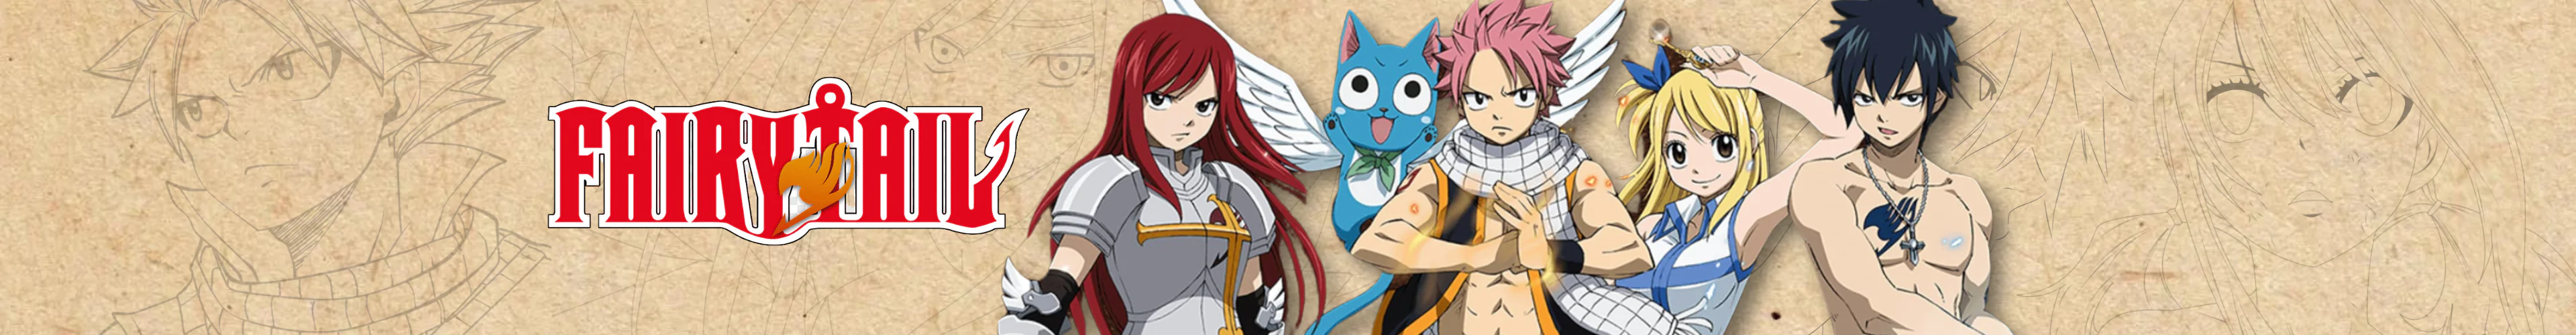 Fairy Tail products banner